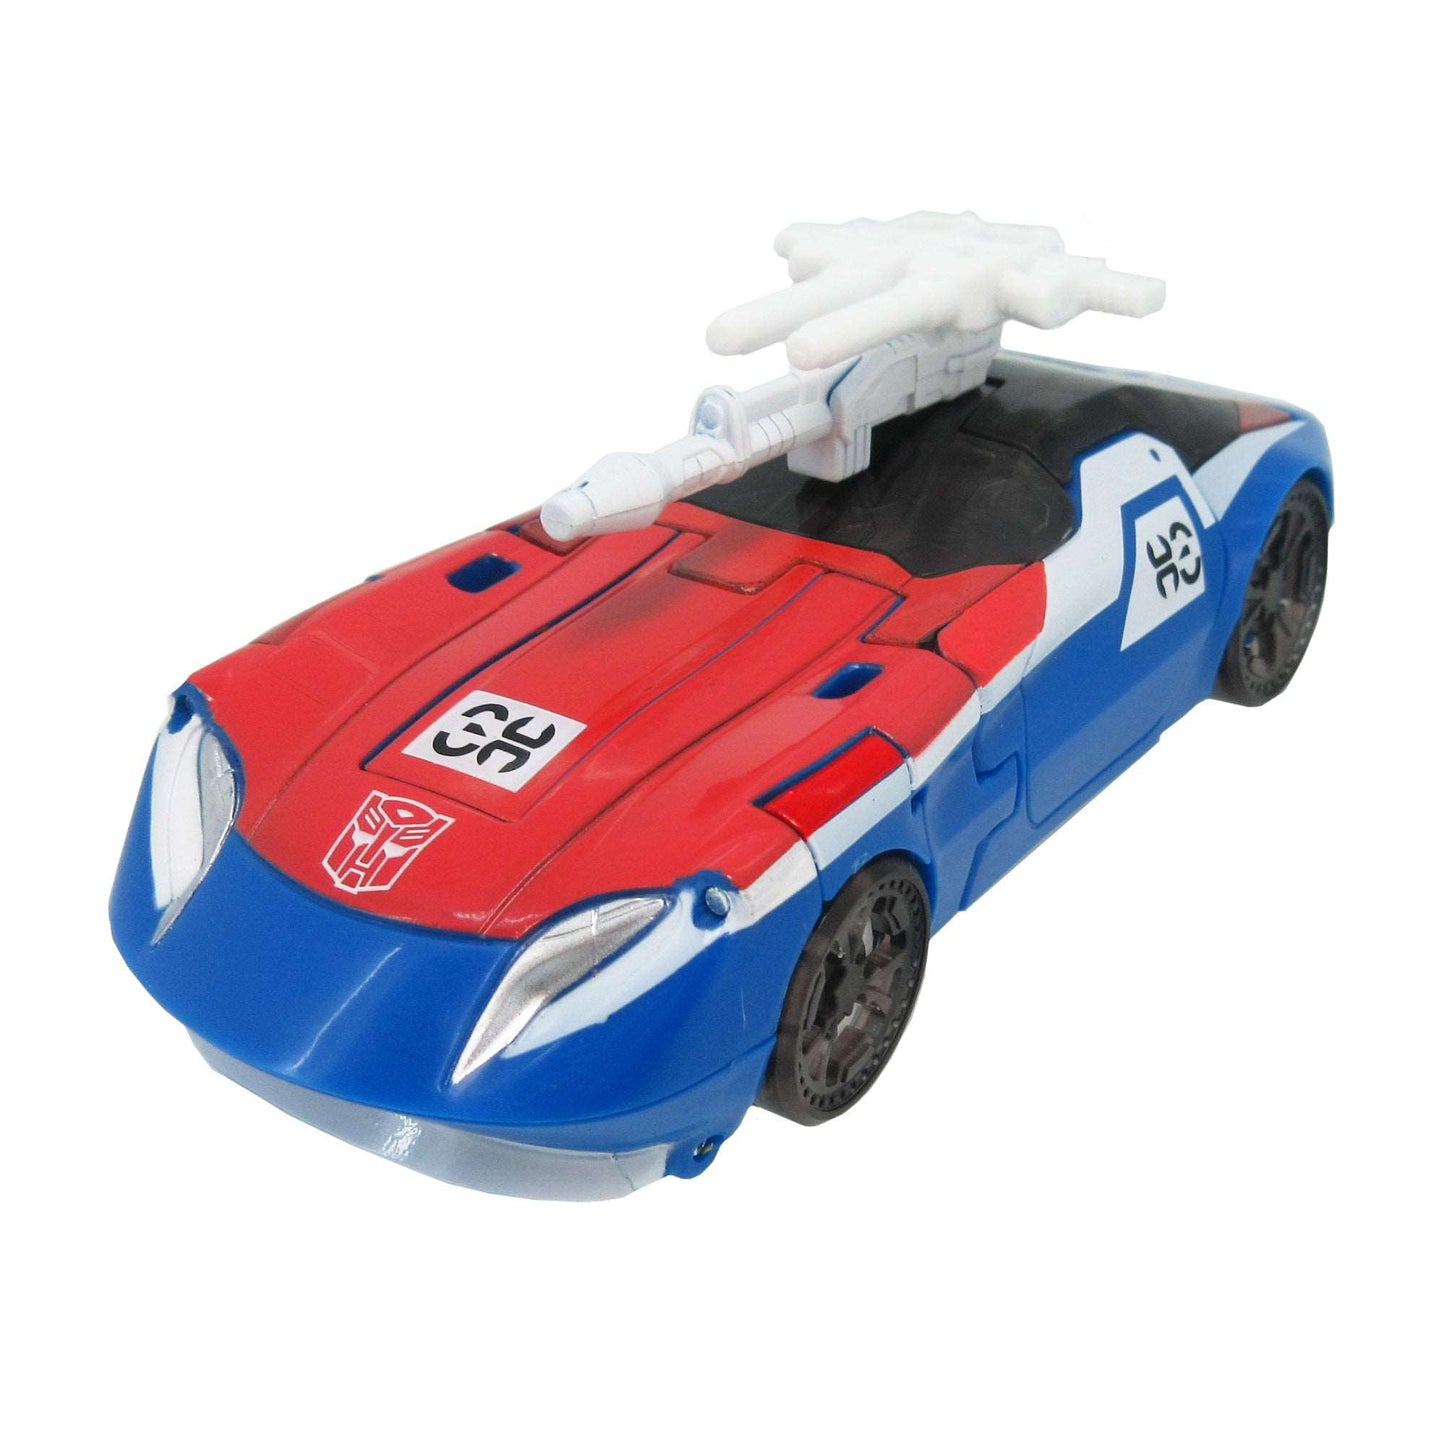 Transformers Generations Selects WFC-GS06 Deluxe Smokescreen car vehicle mode